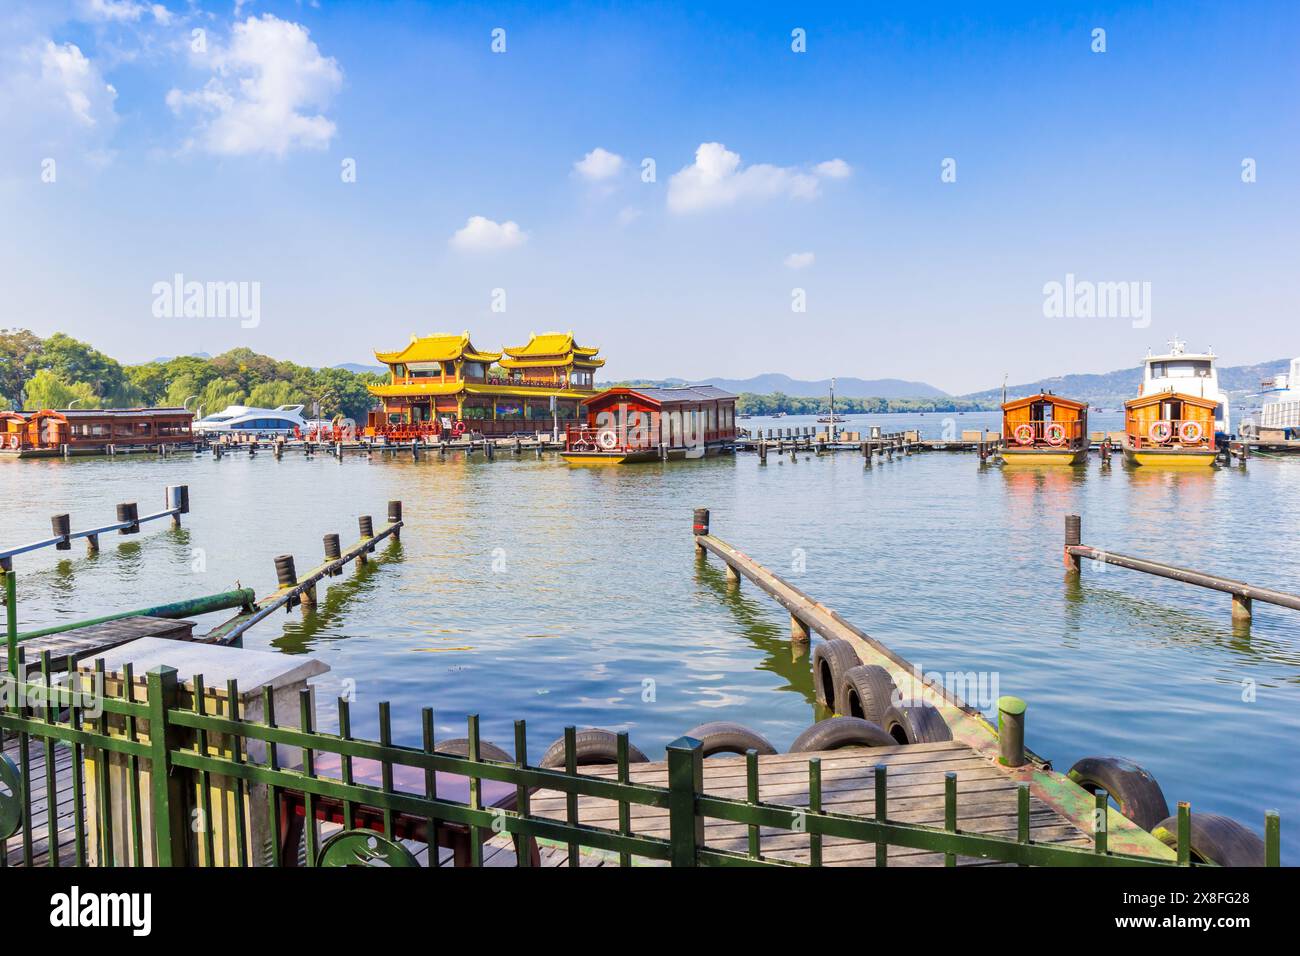 Cruise boats in traditional chinese style at the jetty in Hangzhou, China Stock Photo